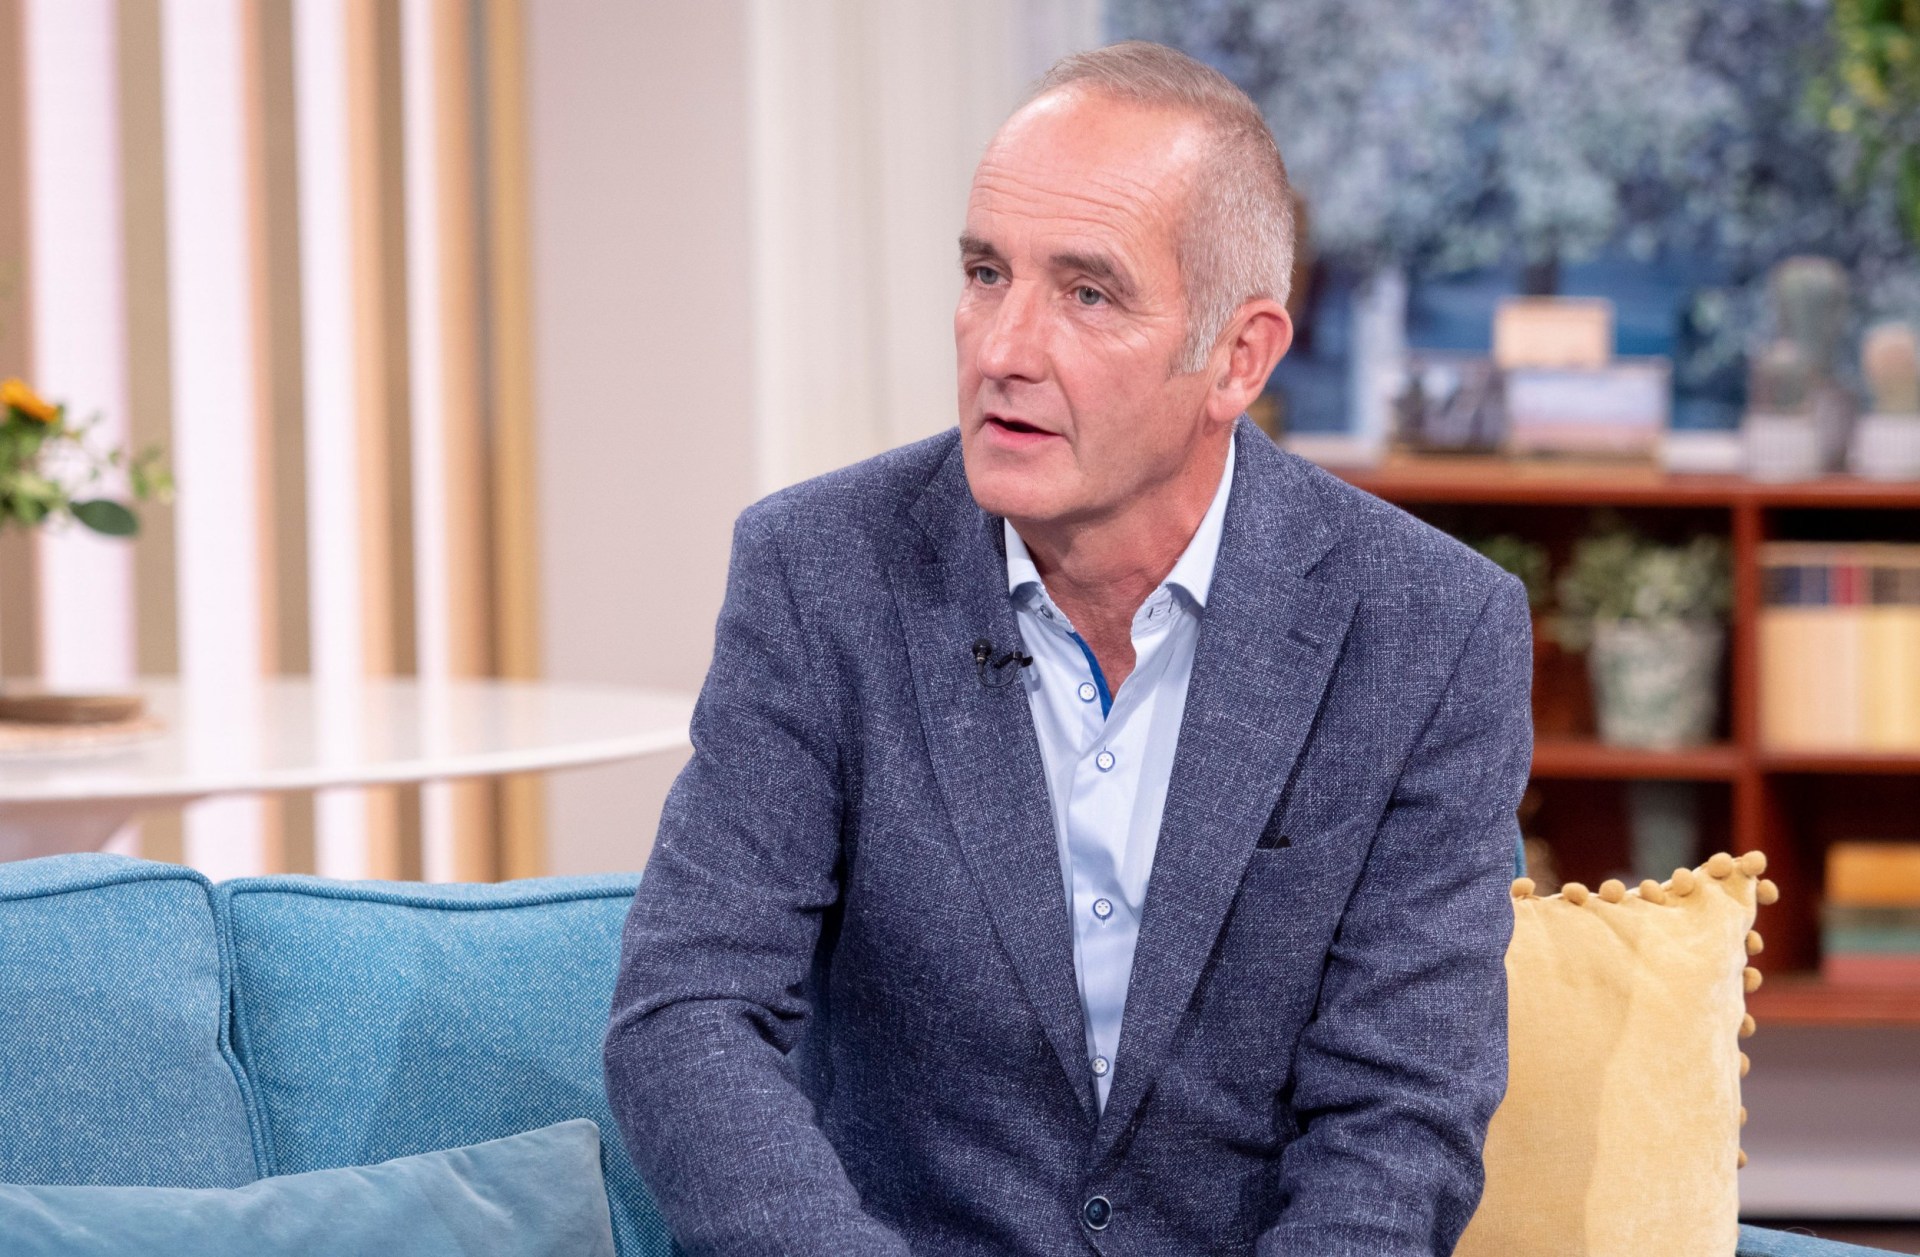 grand designs’ kevin mccloud warns uk property market is ‘broken and dysfunctional’